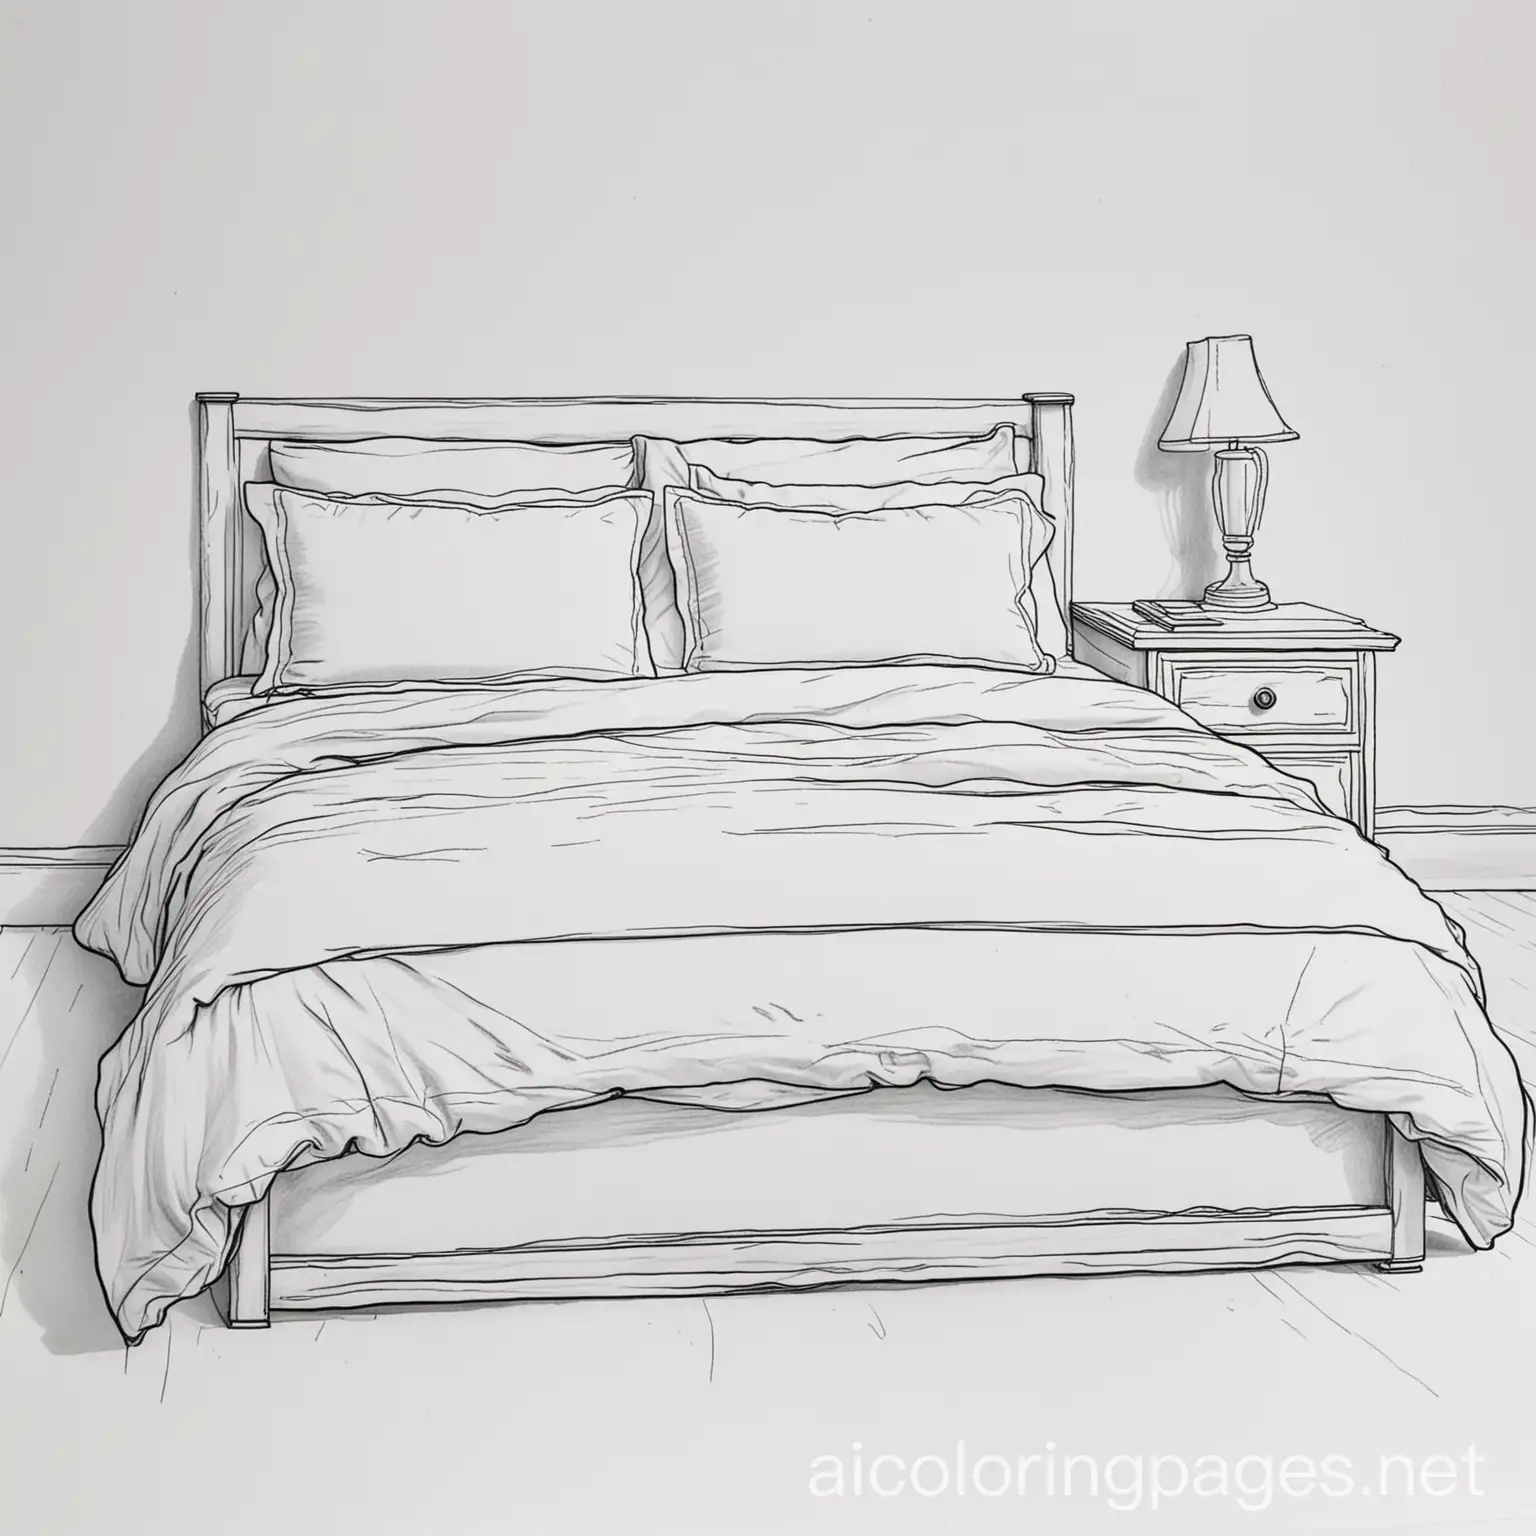 bed, Coloring Page, black and white, line art, white background, Simplicity, Ample White Space. The background of the coloring page is plain white to make it easy for young children to color within the lines. The outlines of all the subjects are easy to distinguish, making it simple for kids to color without too much difficulty